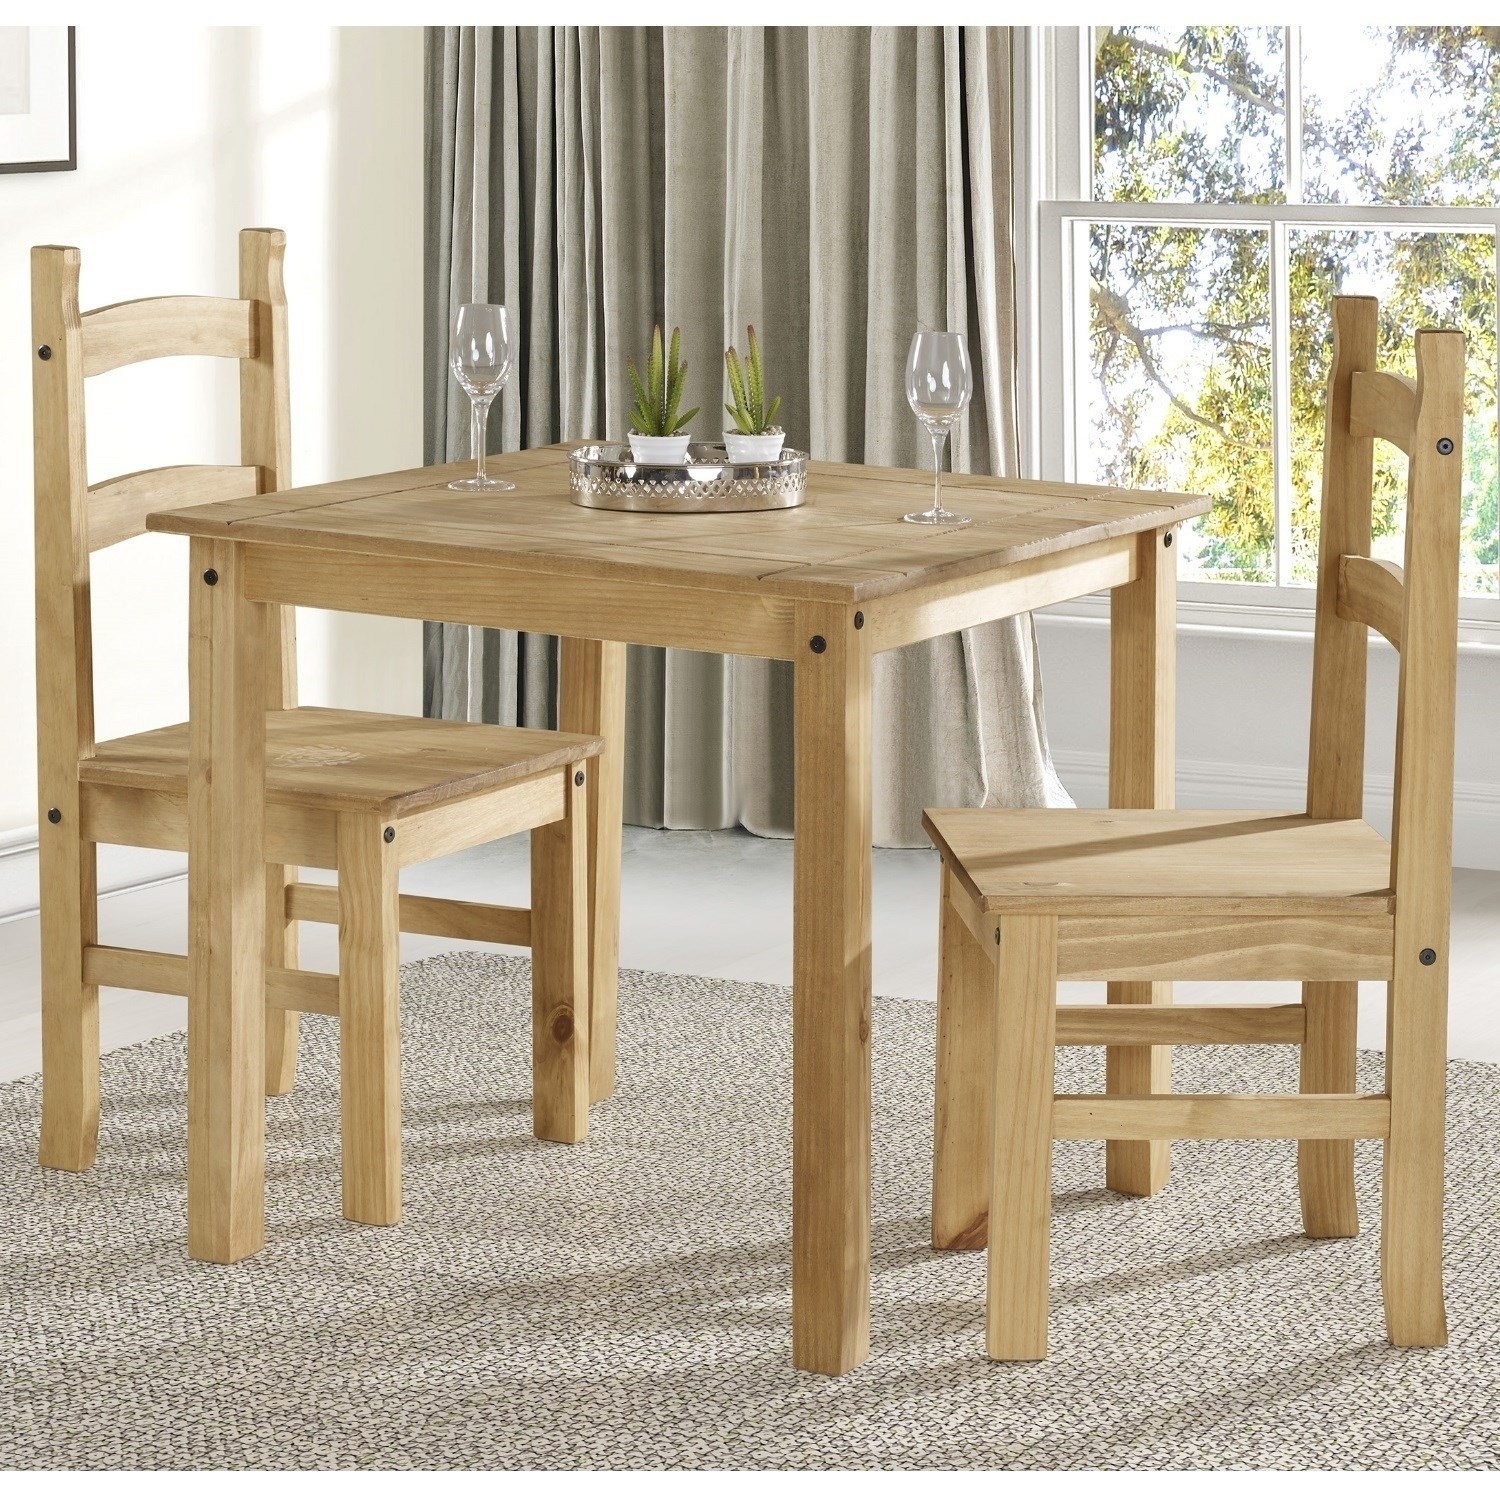 Corona Mexican Solid Pine Square Dining, Mexican Style Dining Room Tables